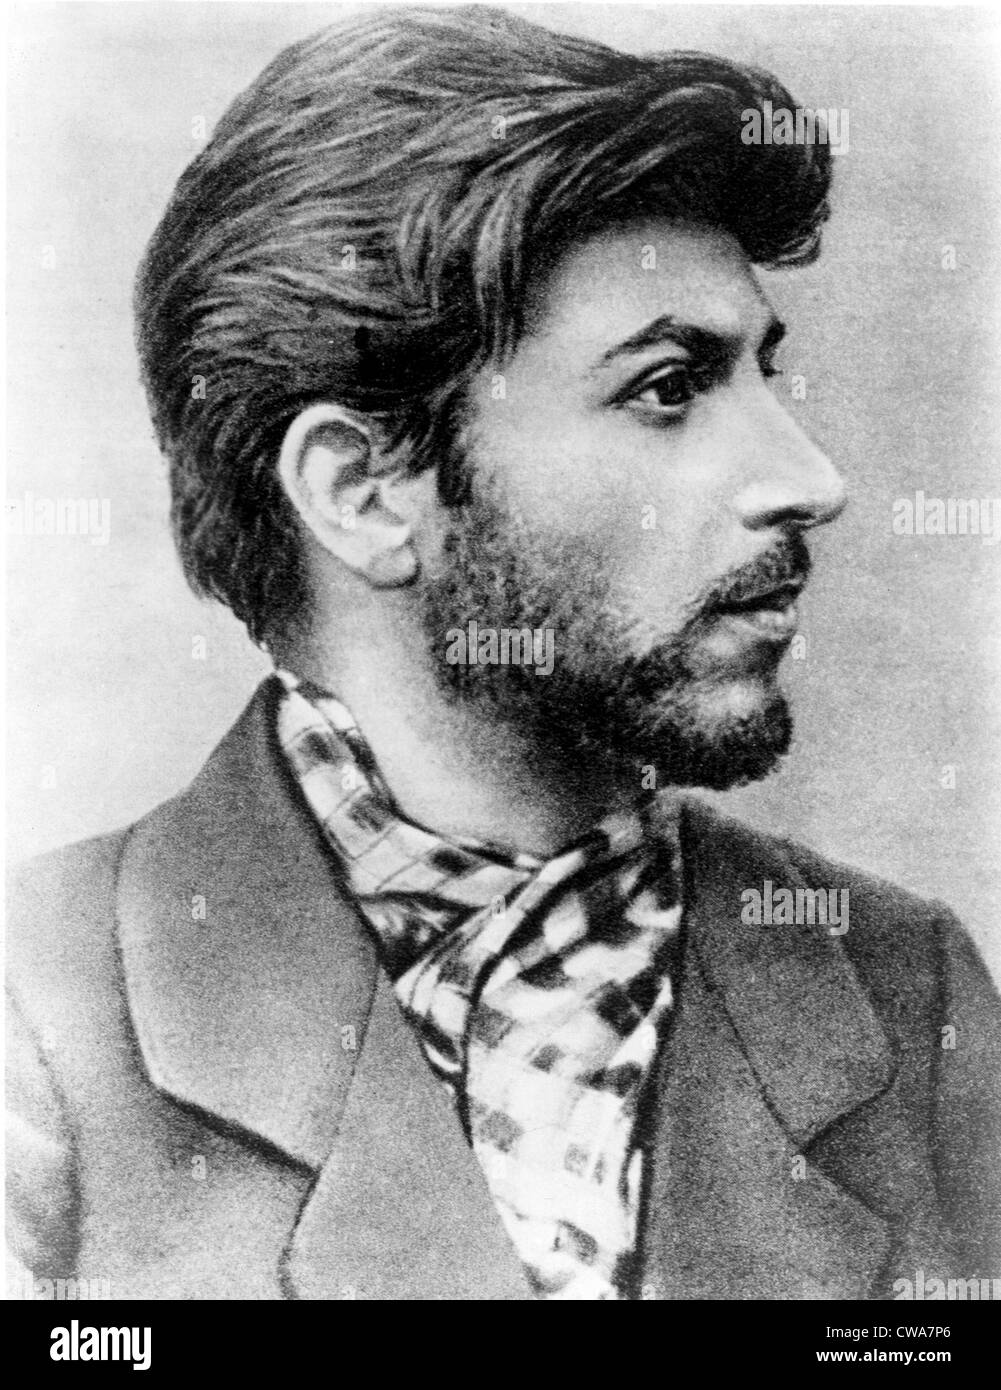 Josef Stalin as a young revolutionary in 1900.. Courtesy: CSU Archives / Everett Collection Stock Photo